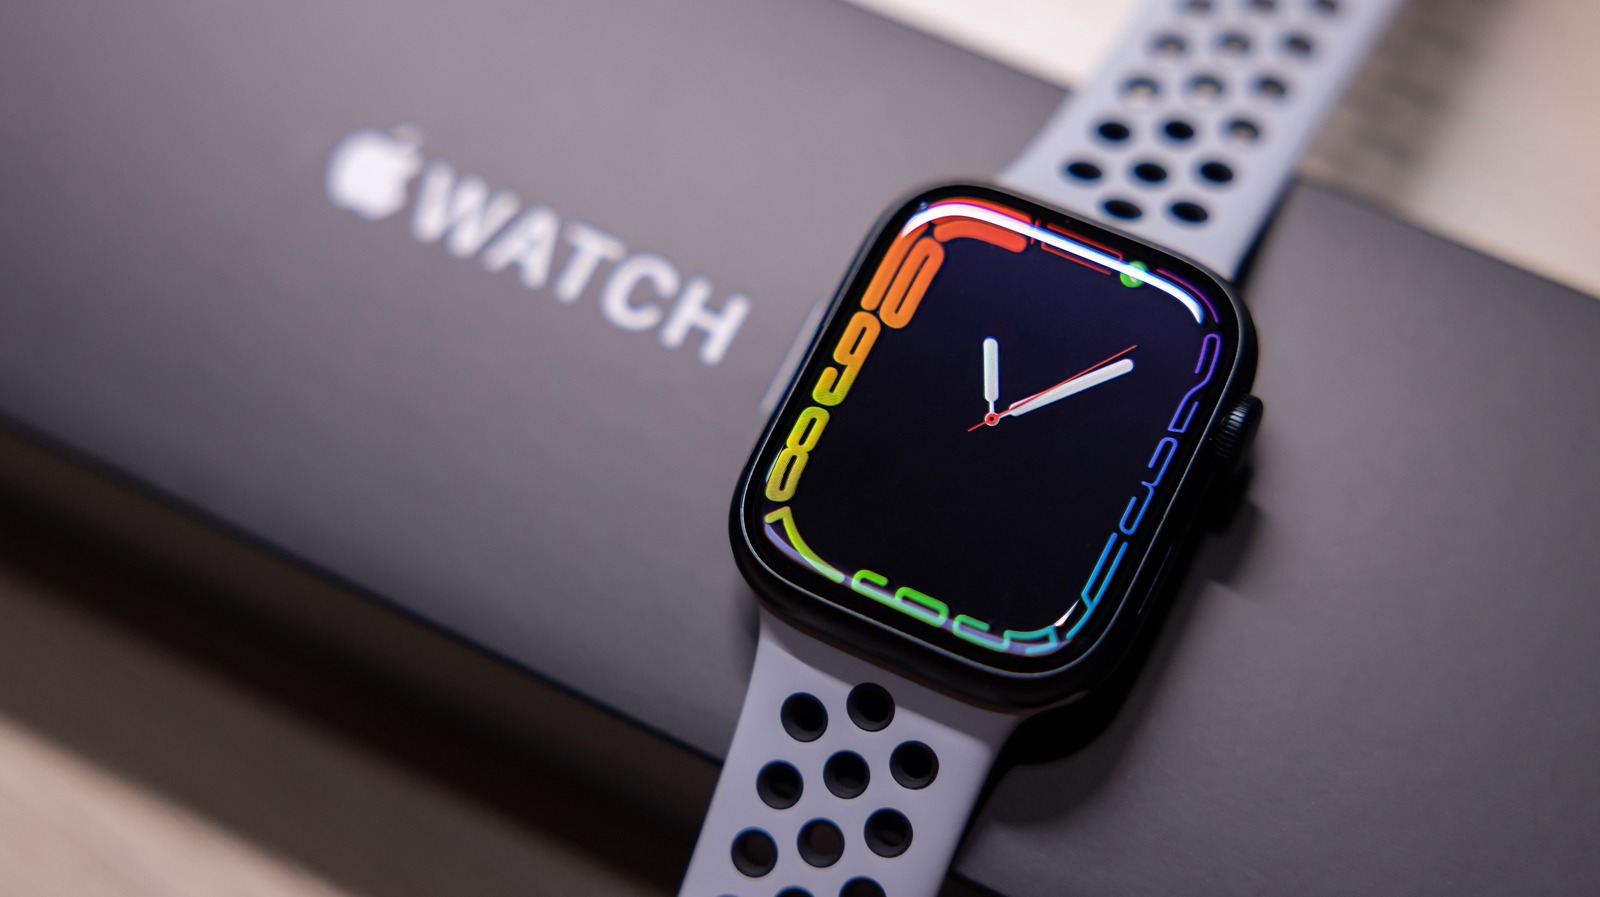 The Apple Watch Still Doesn’t Have Dark Mode, But Here’s How To Set Up The Next Best Thing